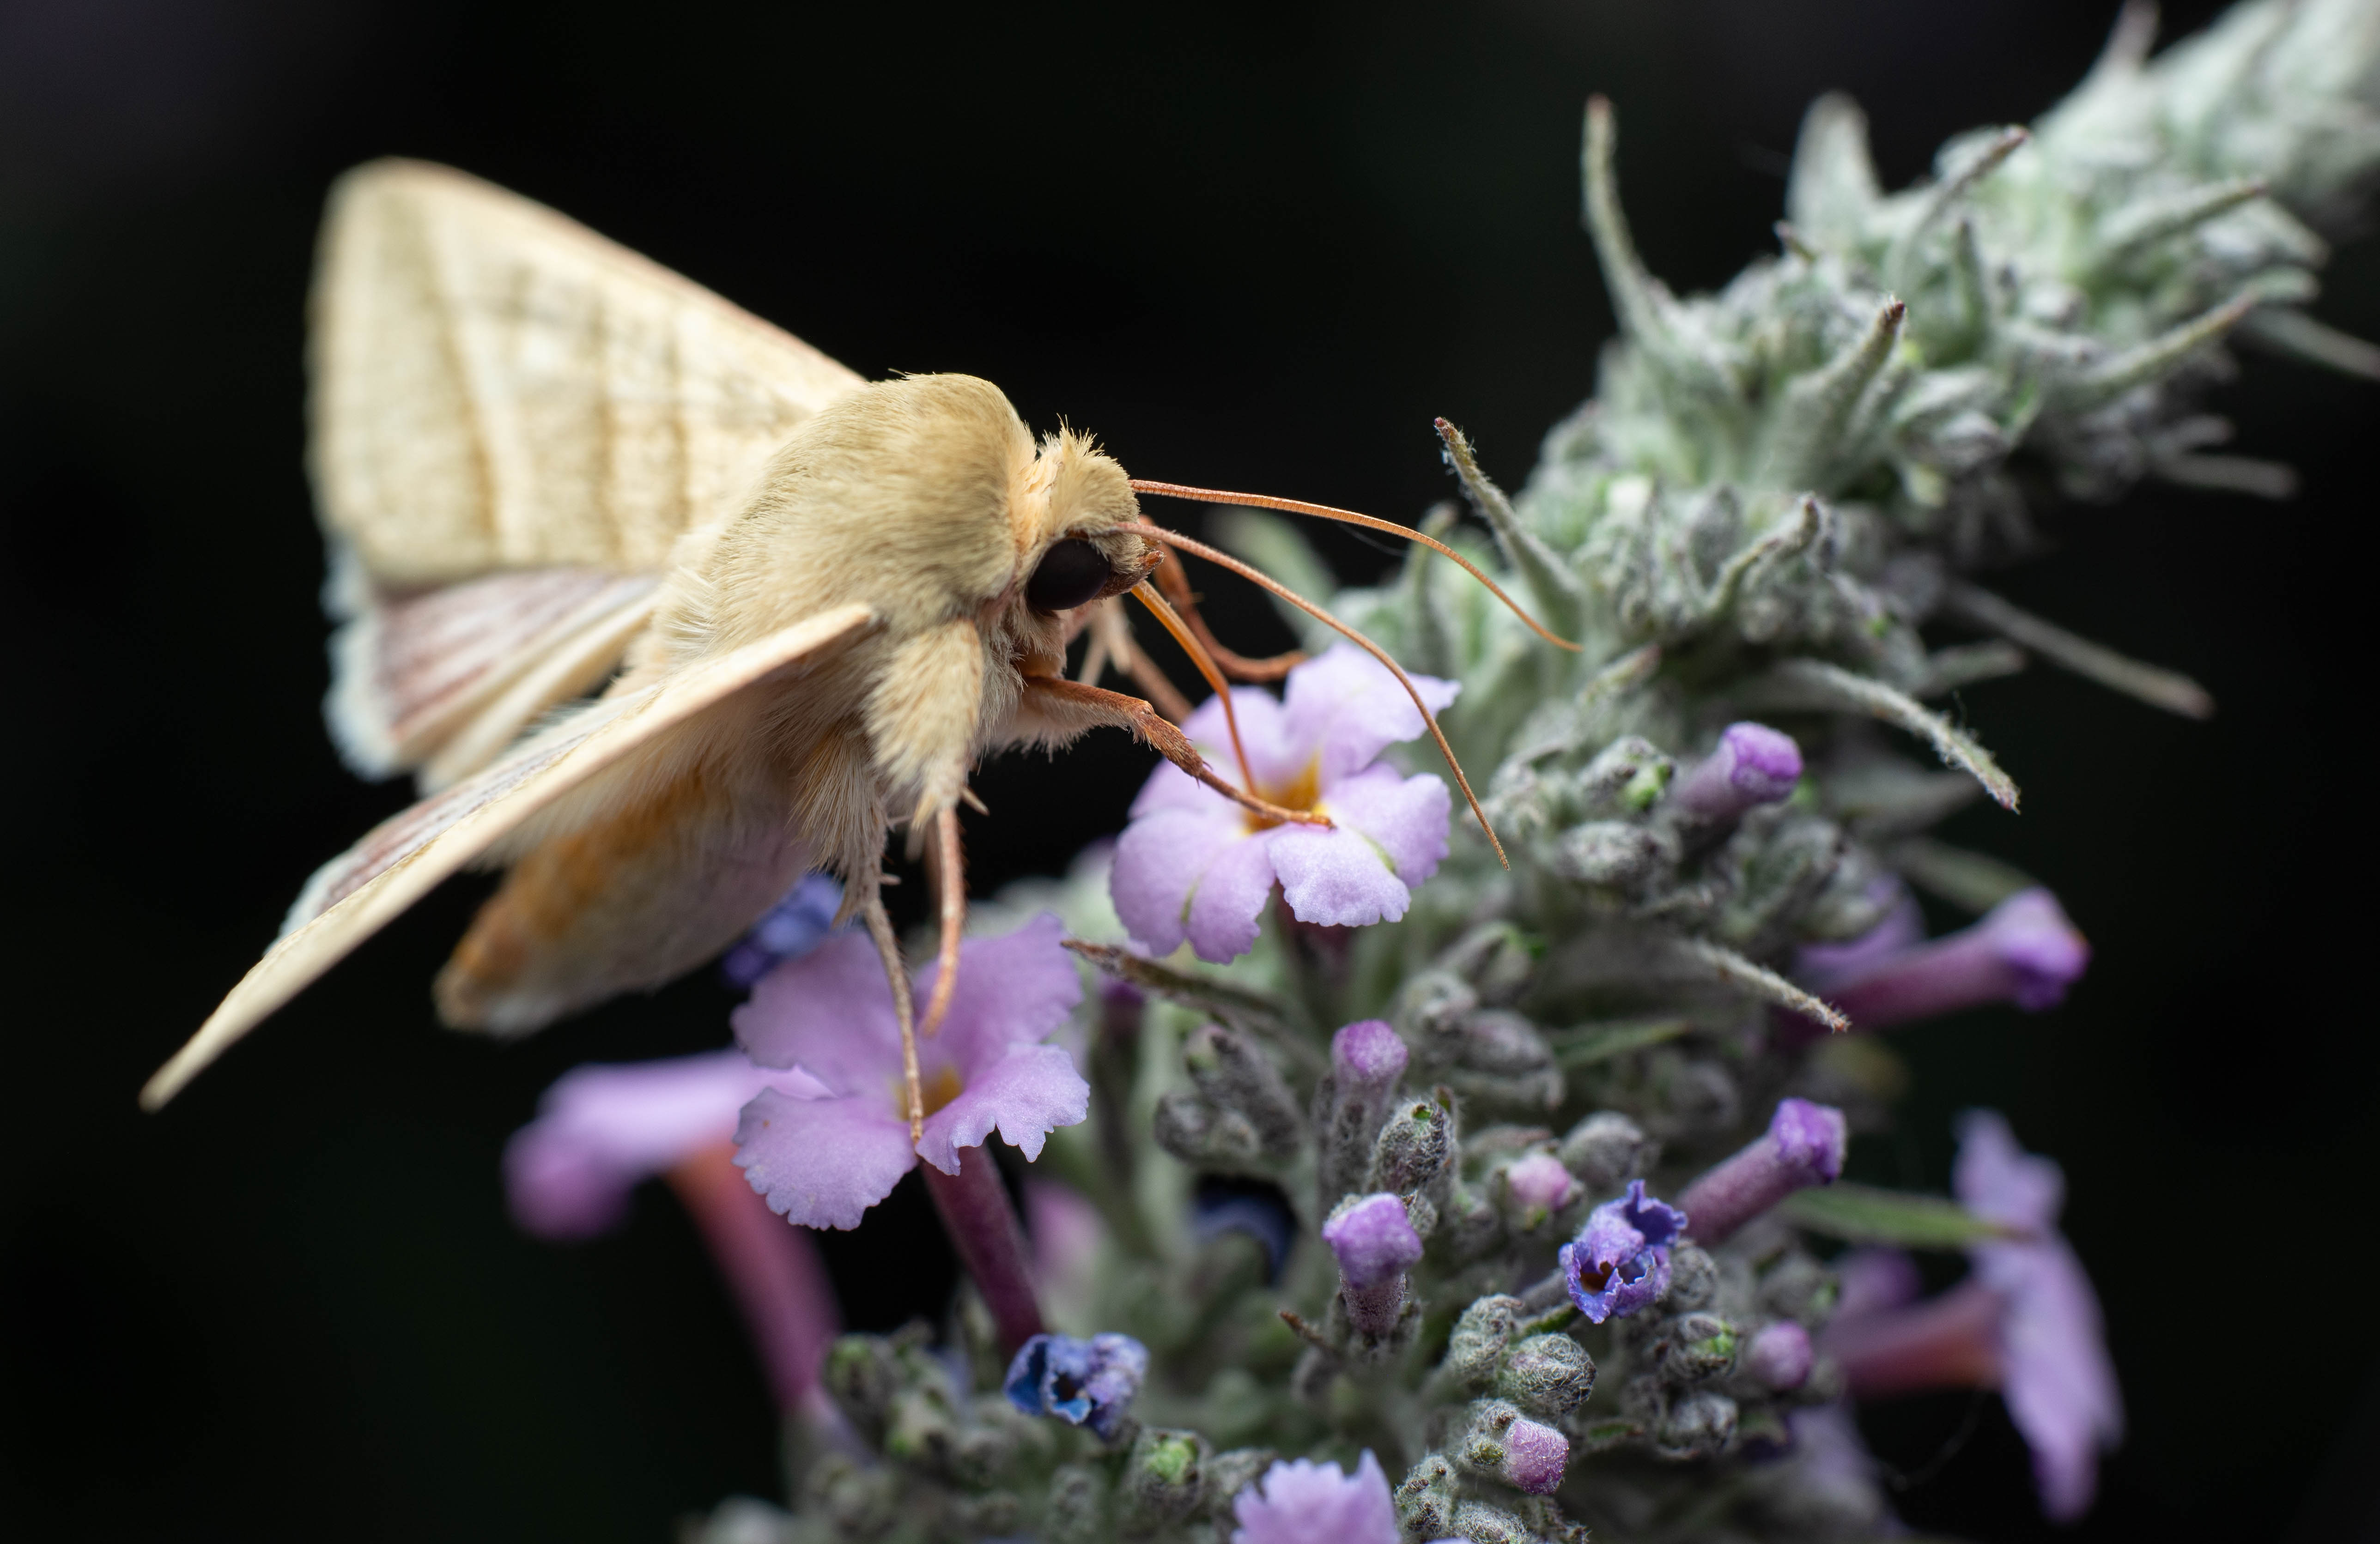 Moth perched on the flowers of a Buddleia